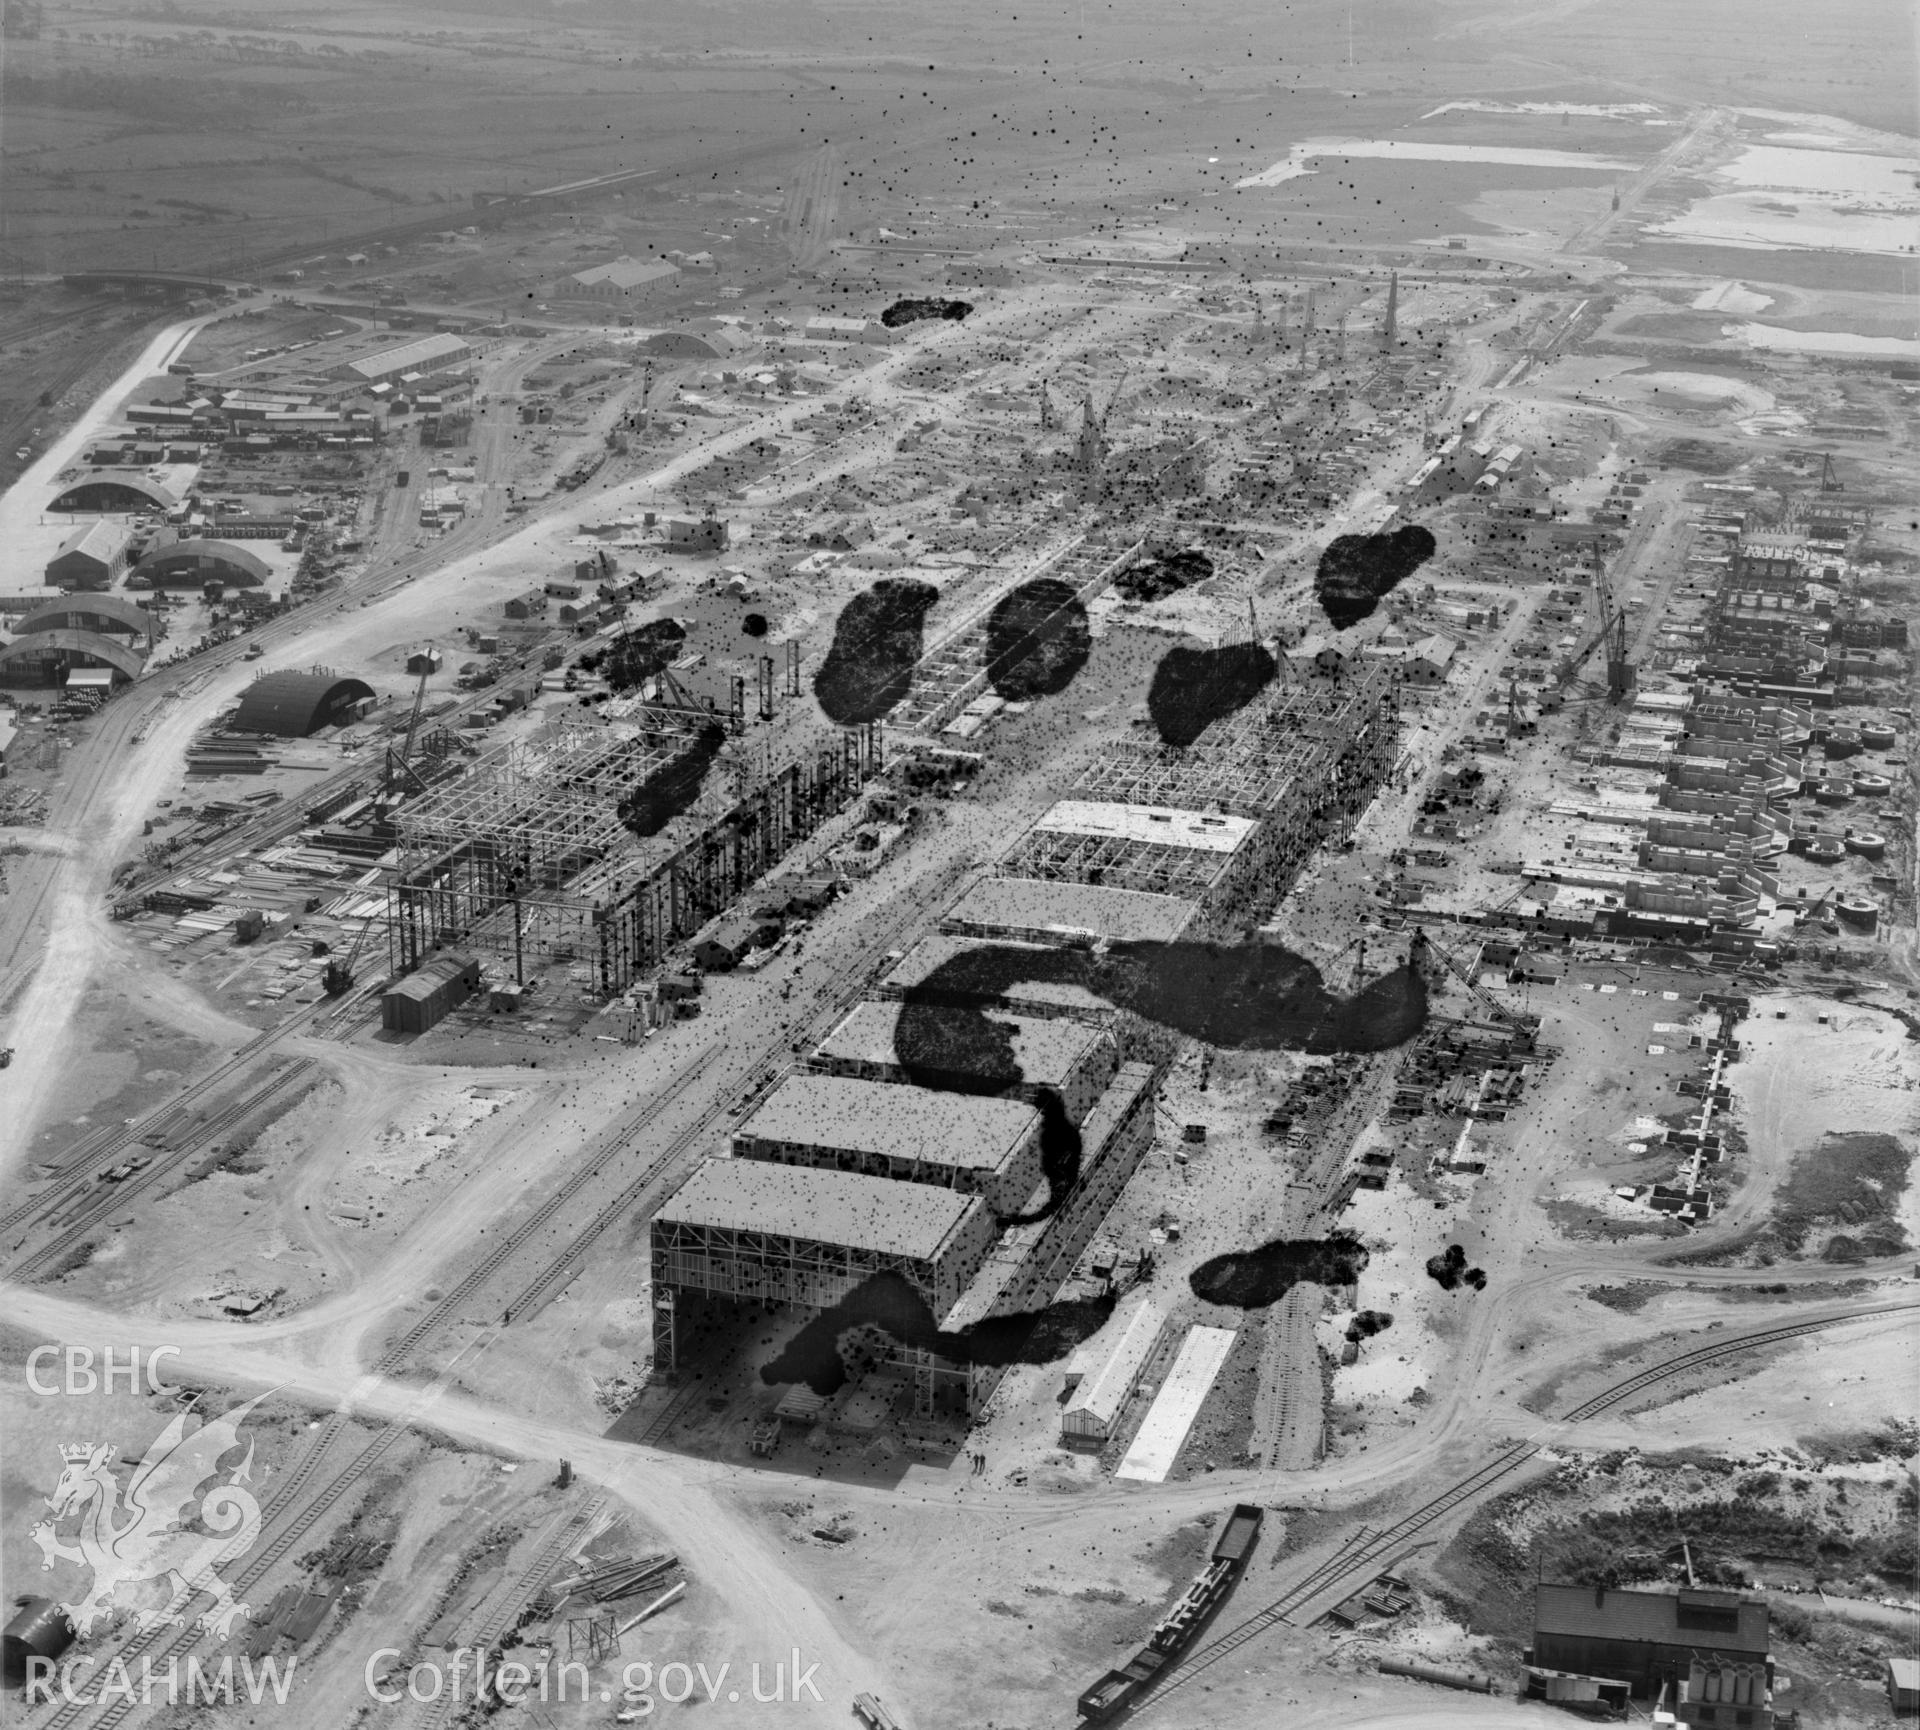 View of Abbey Steelworks, Port Talbot under construction